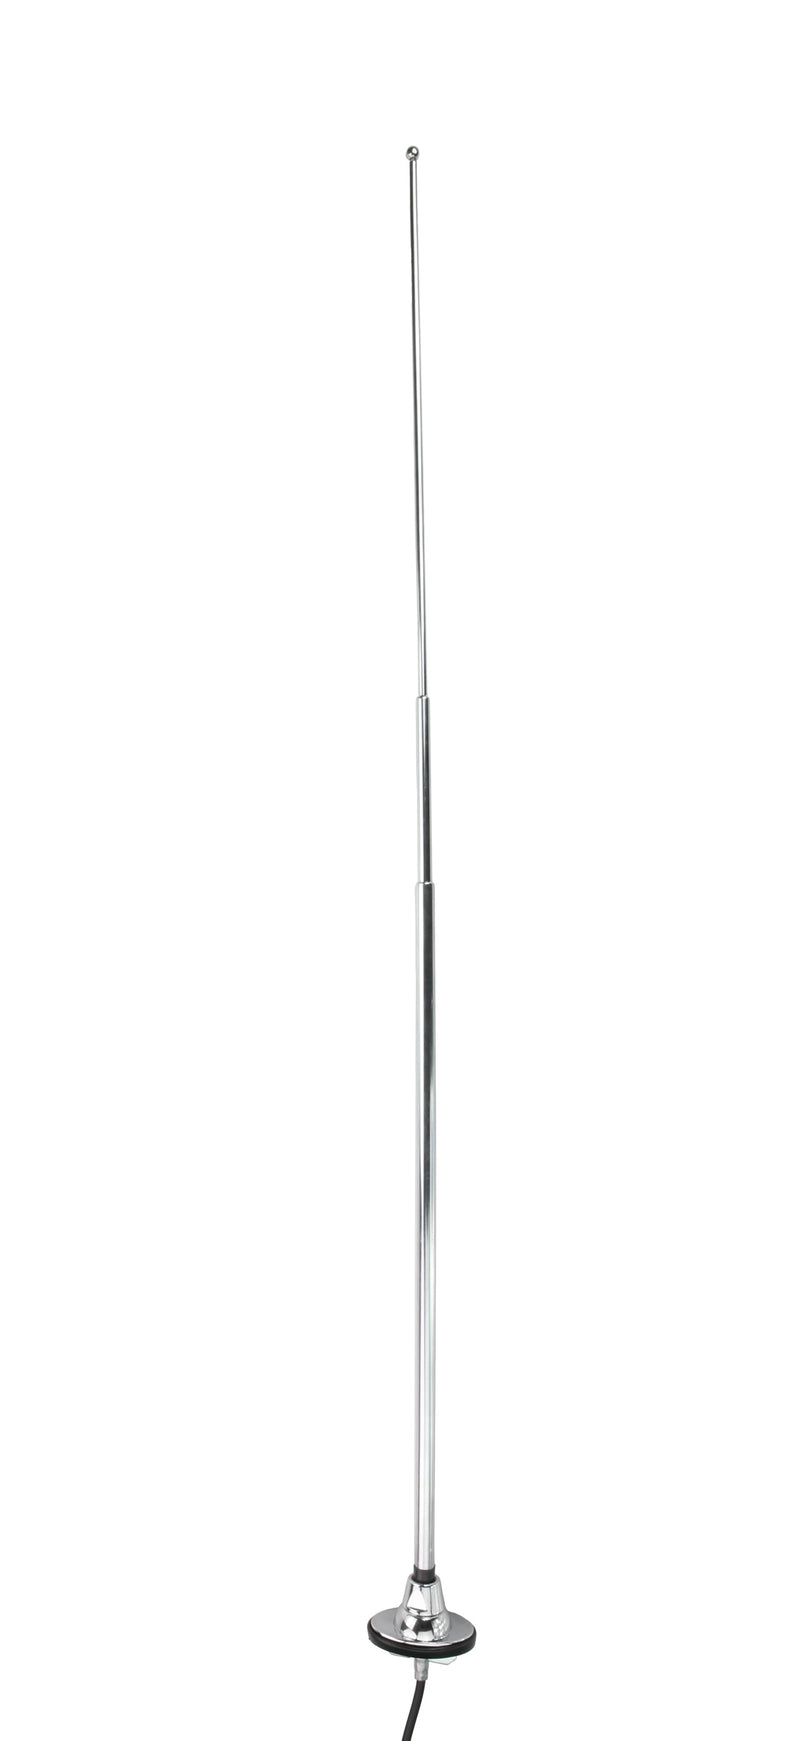 1972-76 Ford Torino Replacement Antenna